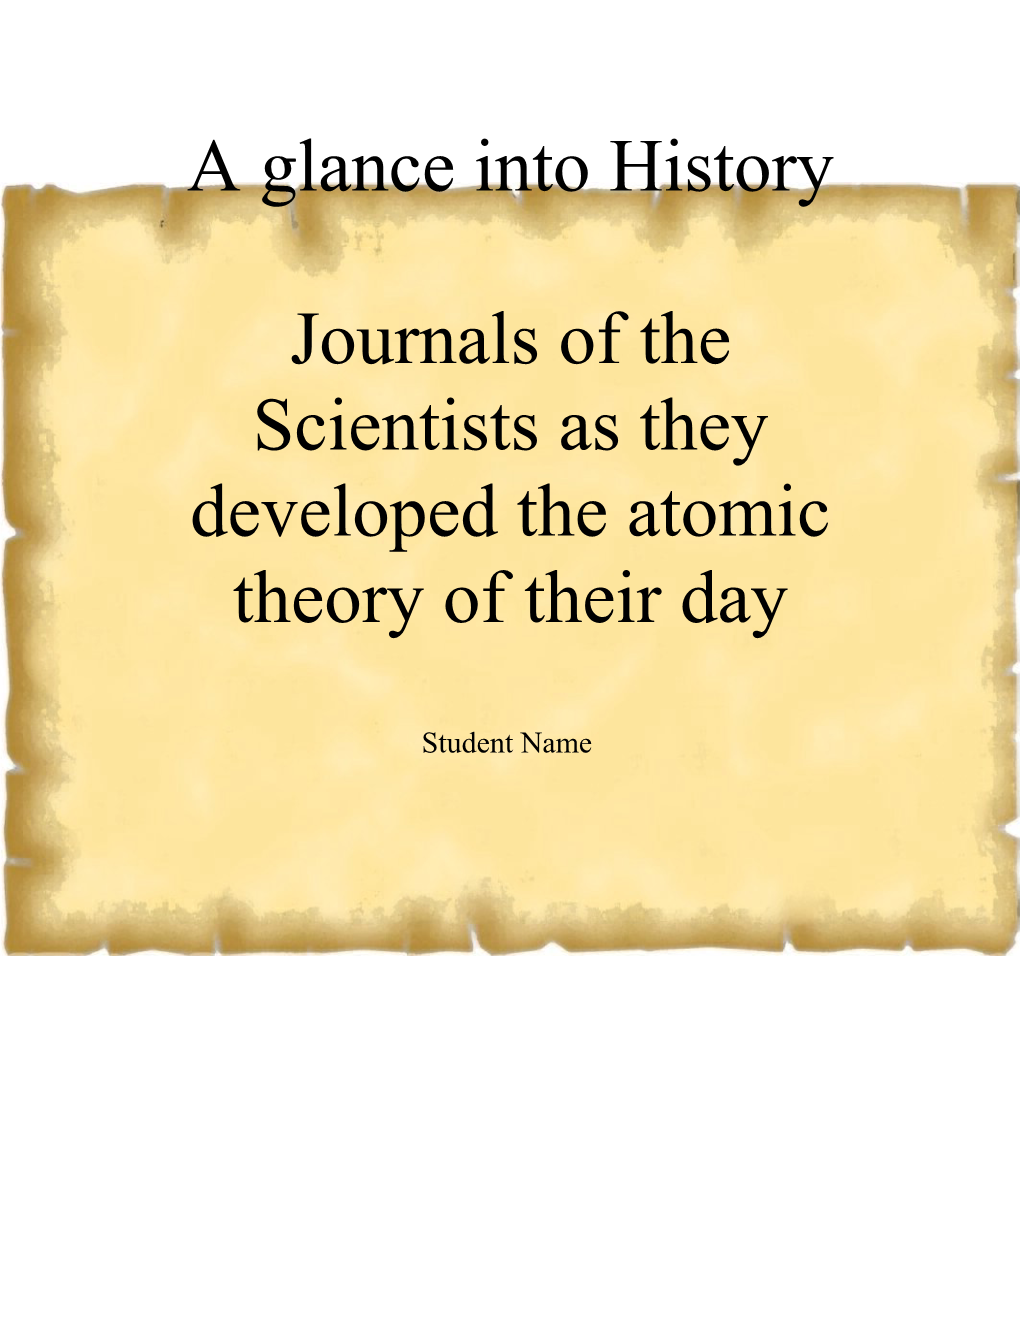 Journals of the Scientists As They Developed the Atomic Theory of Their Day